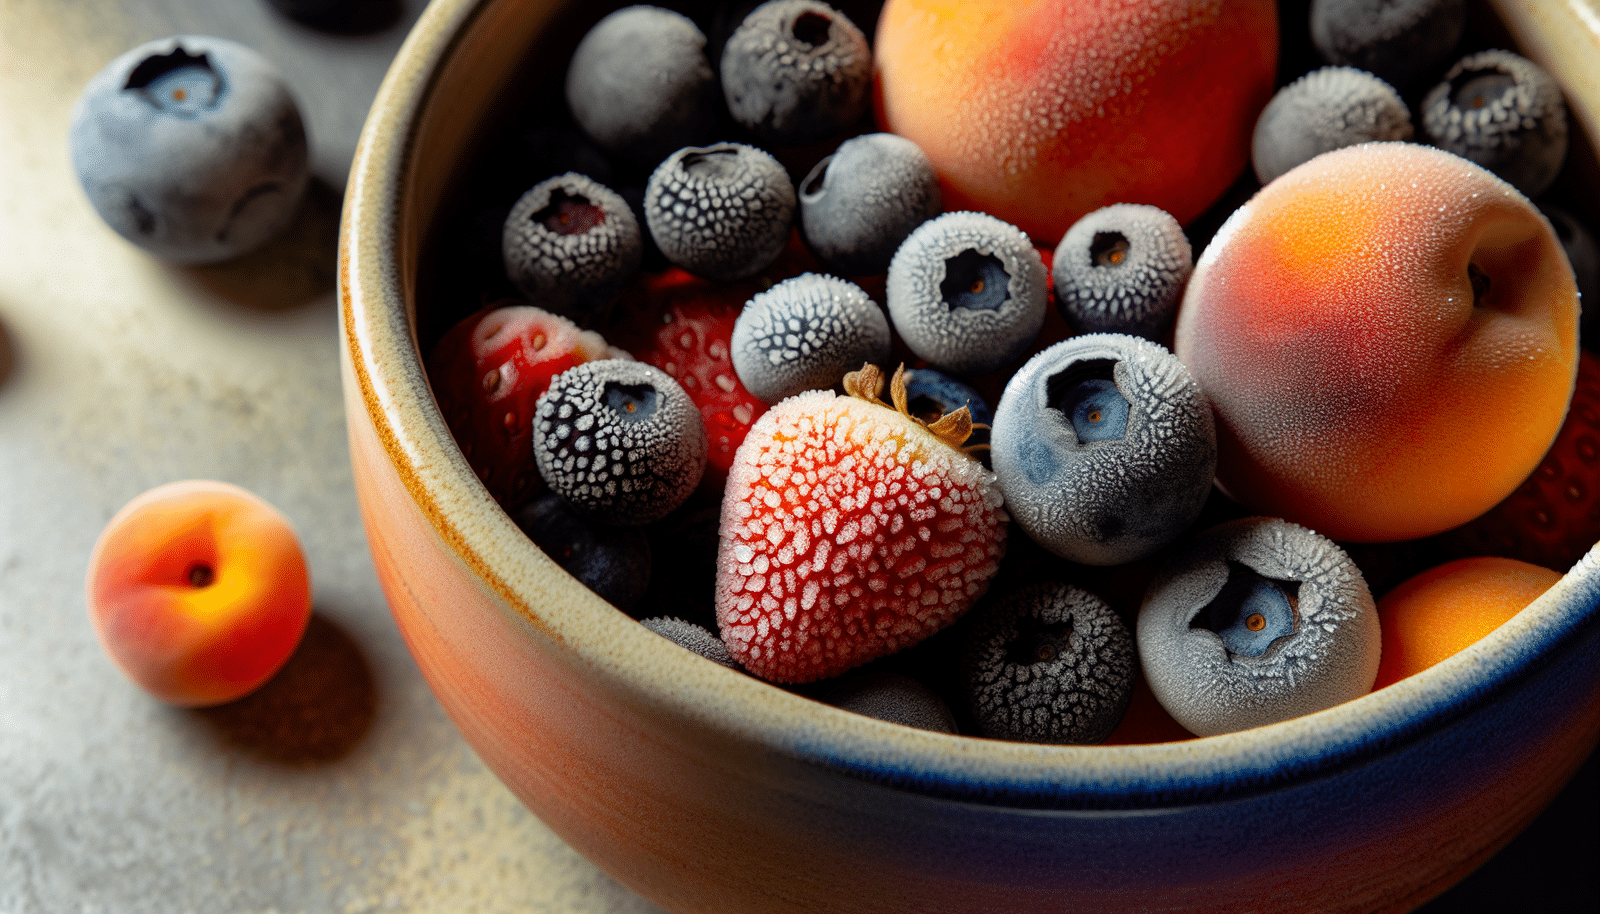 Assorted frozen fruits in a bowl